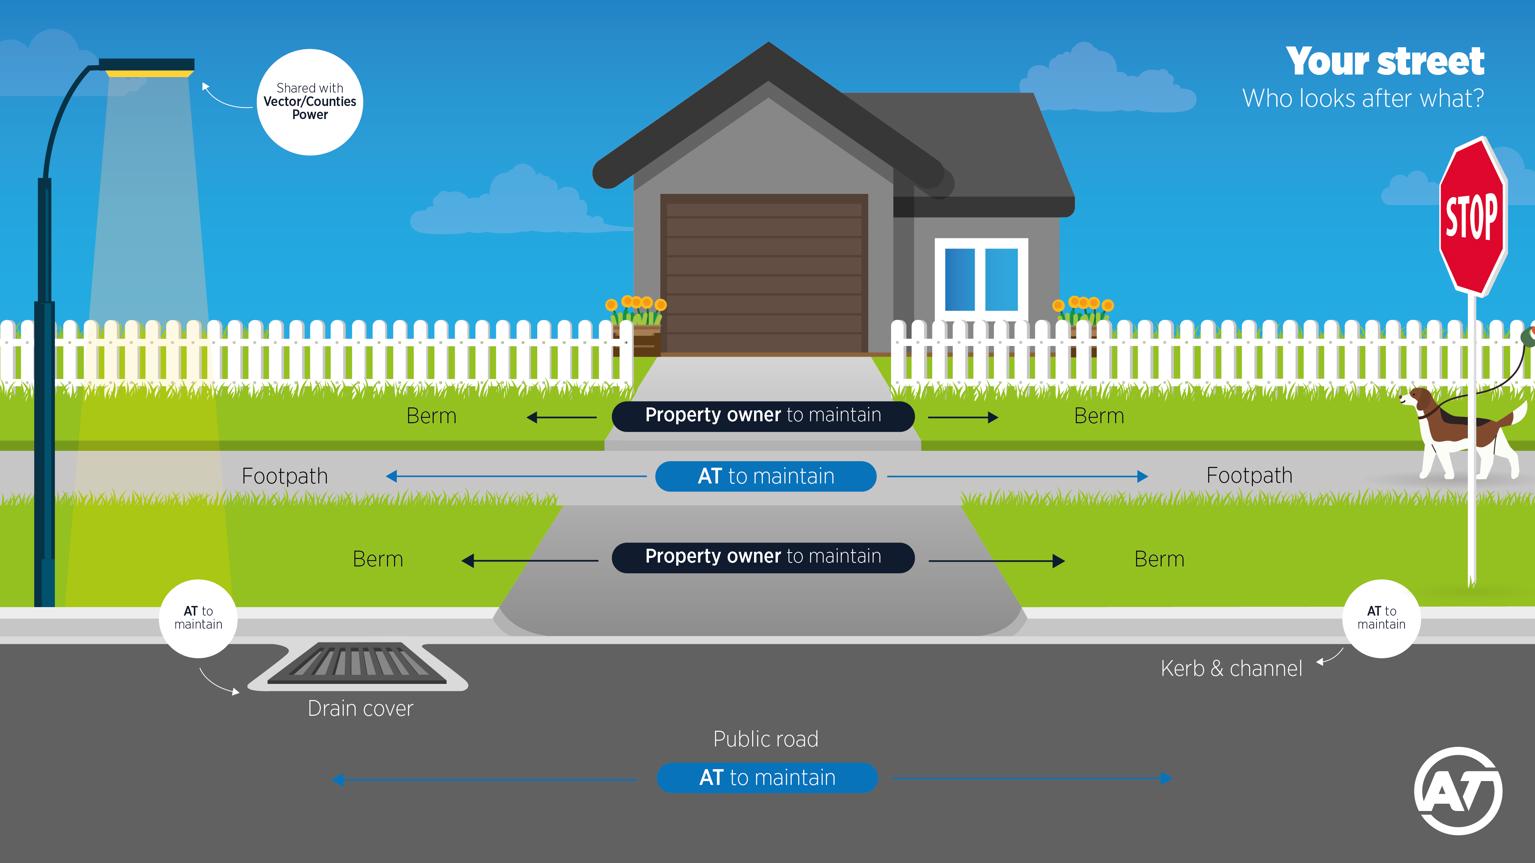 Infographic showing who looks after what on your street: Auckland Transport maintains footpaths, public roads, kerbs and channels, and drain covers. Streetlight maintenance is shared by Auckland Transport, Vector and Counties Energy.